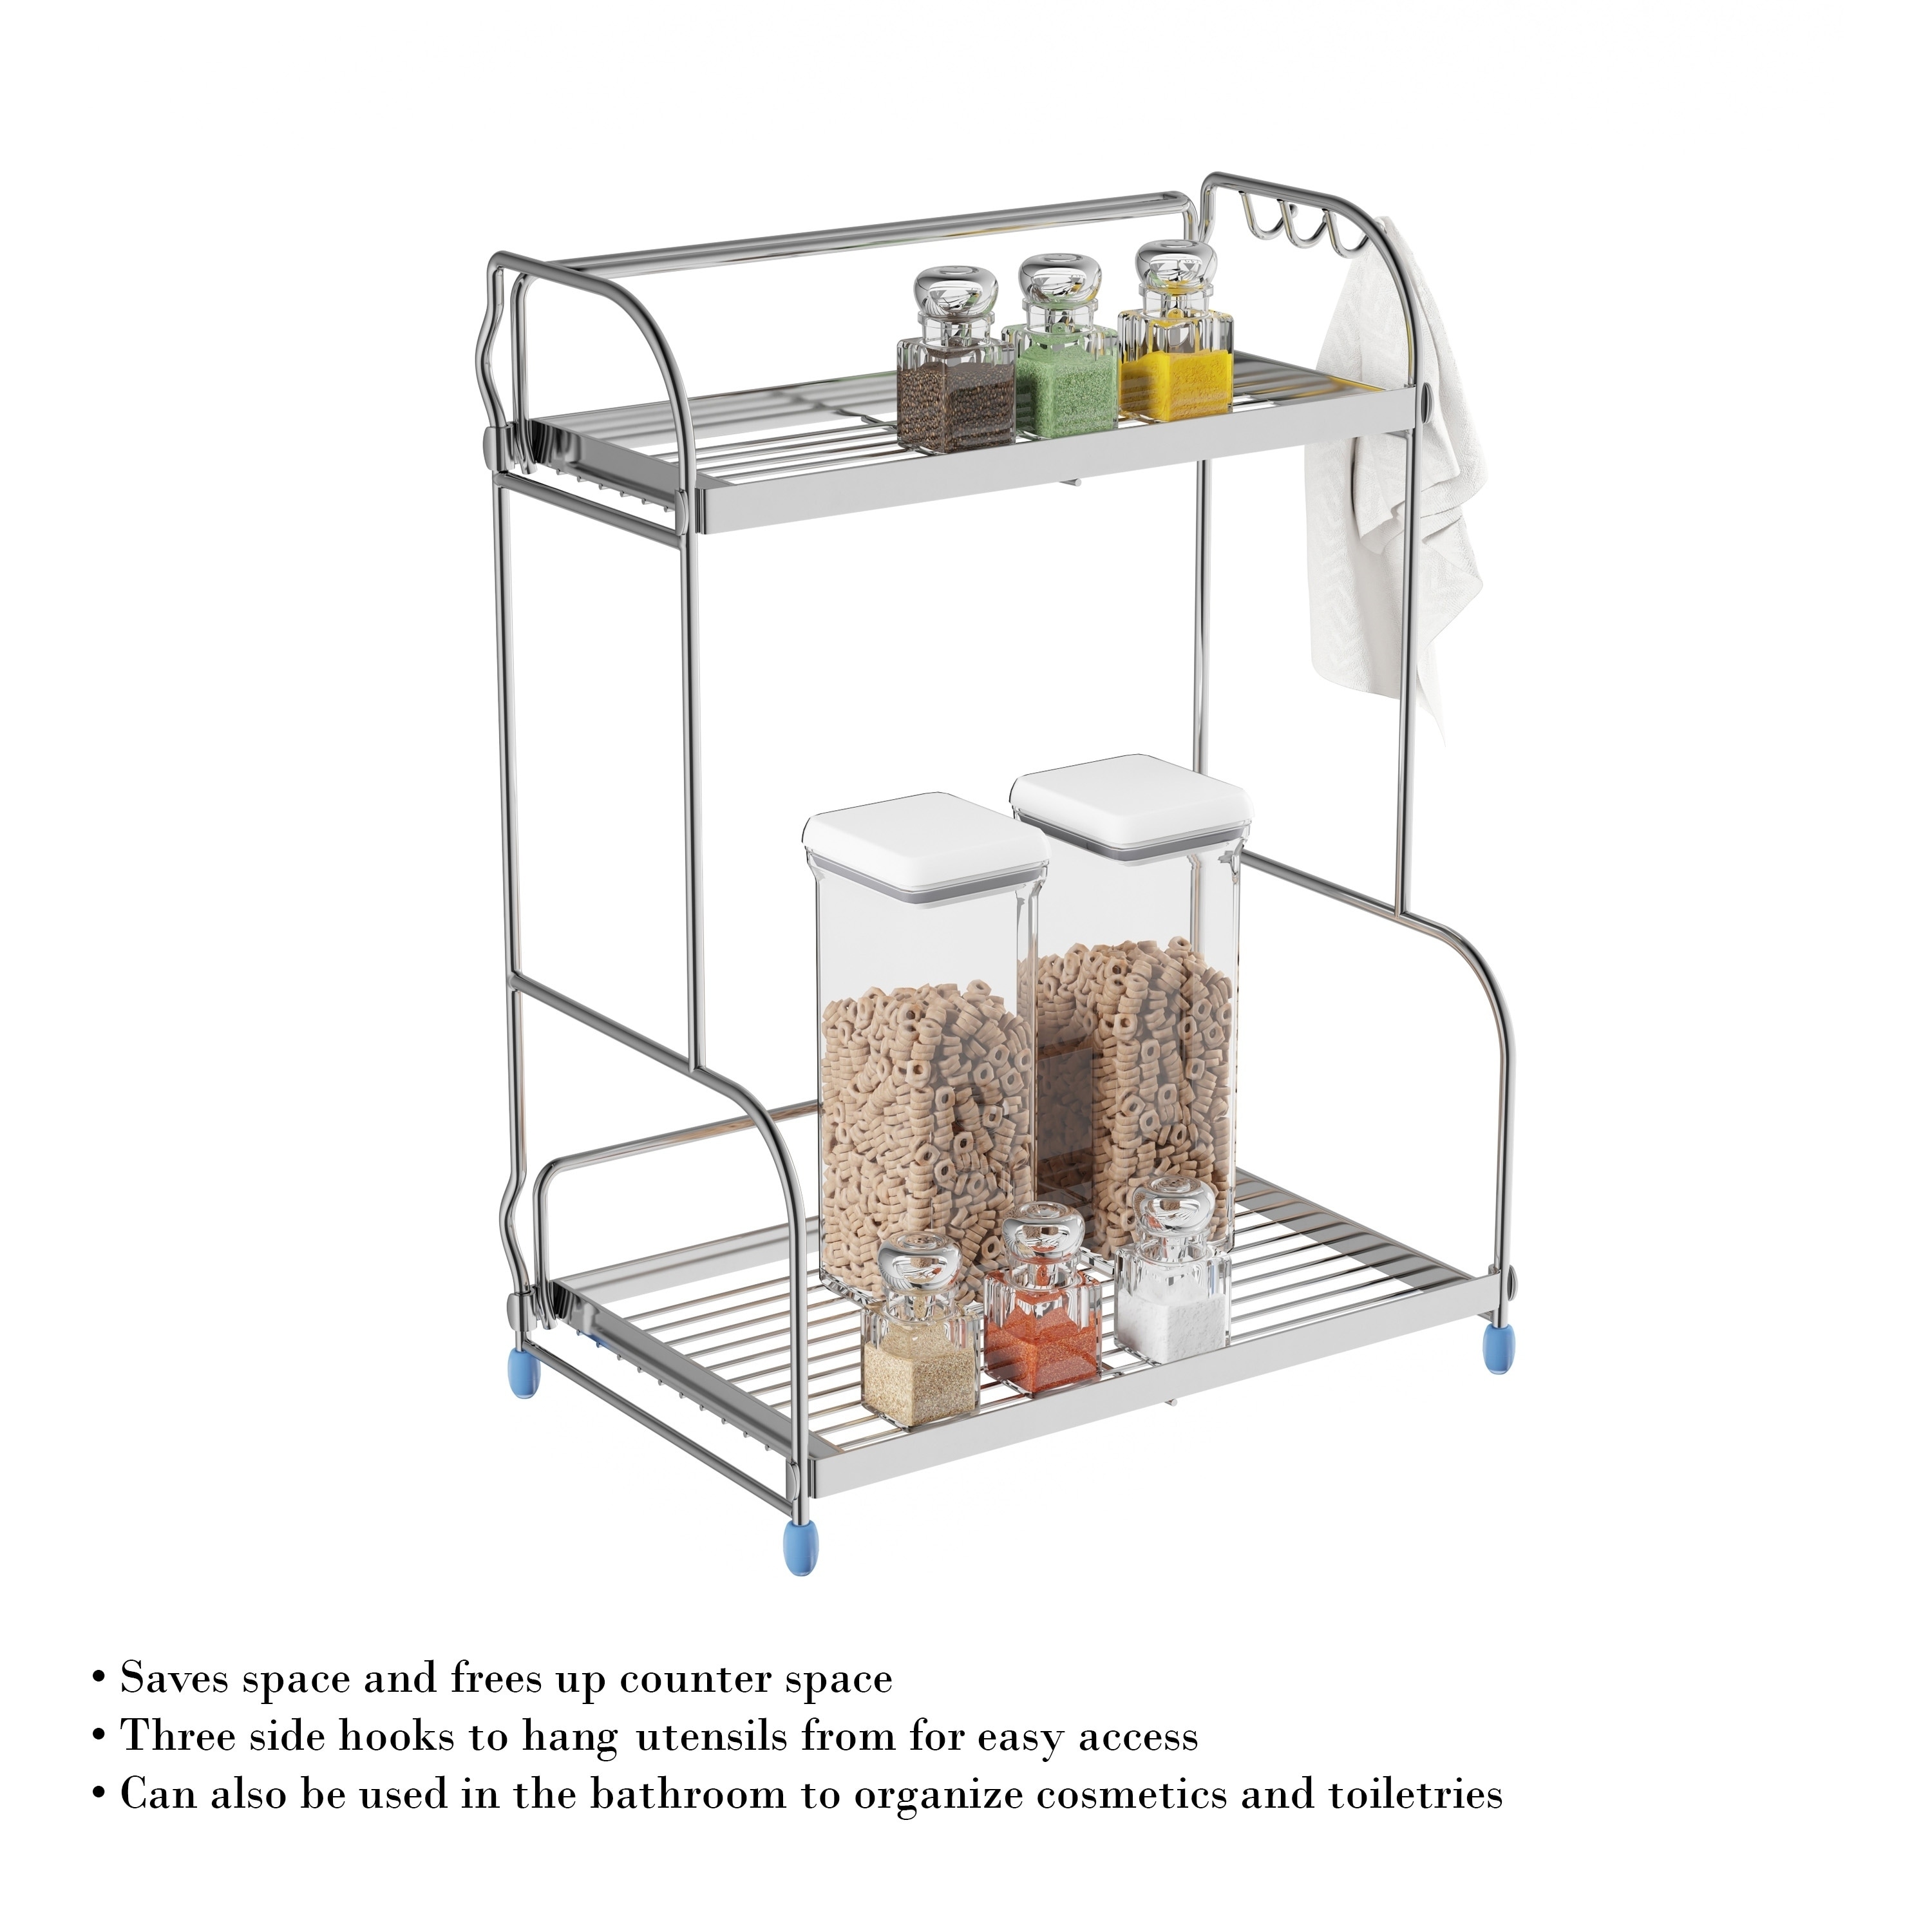 https://ak1.ostkcdn.com/images/products/26042480/2-Tiered-Countertop-Storage-Shelves-with-3-Side-HooksFree-Standing-by-Lavish-Home-32e4e283-a7d1-4d09-9112-531ac8ca231b.jpg